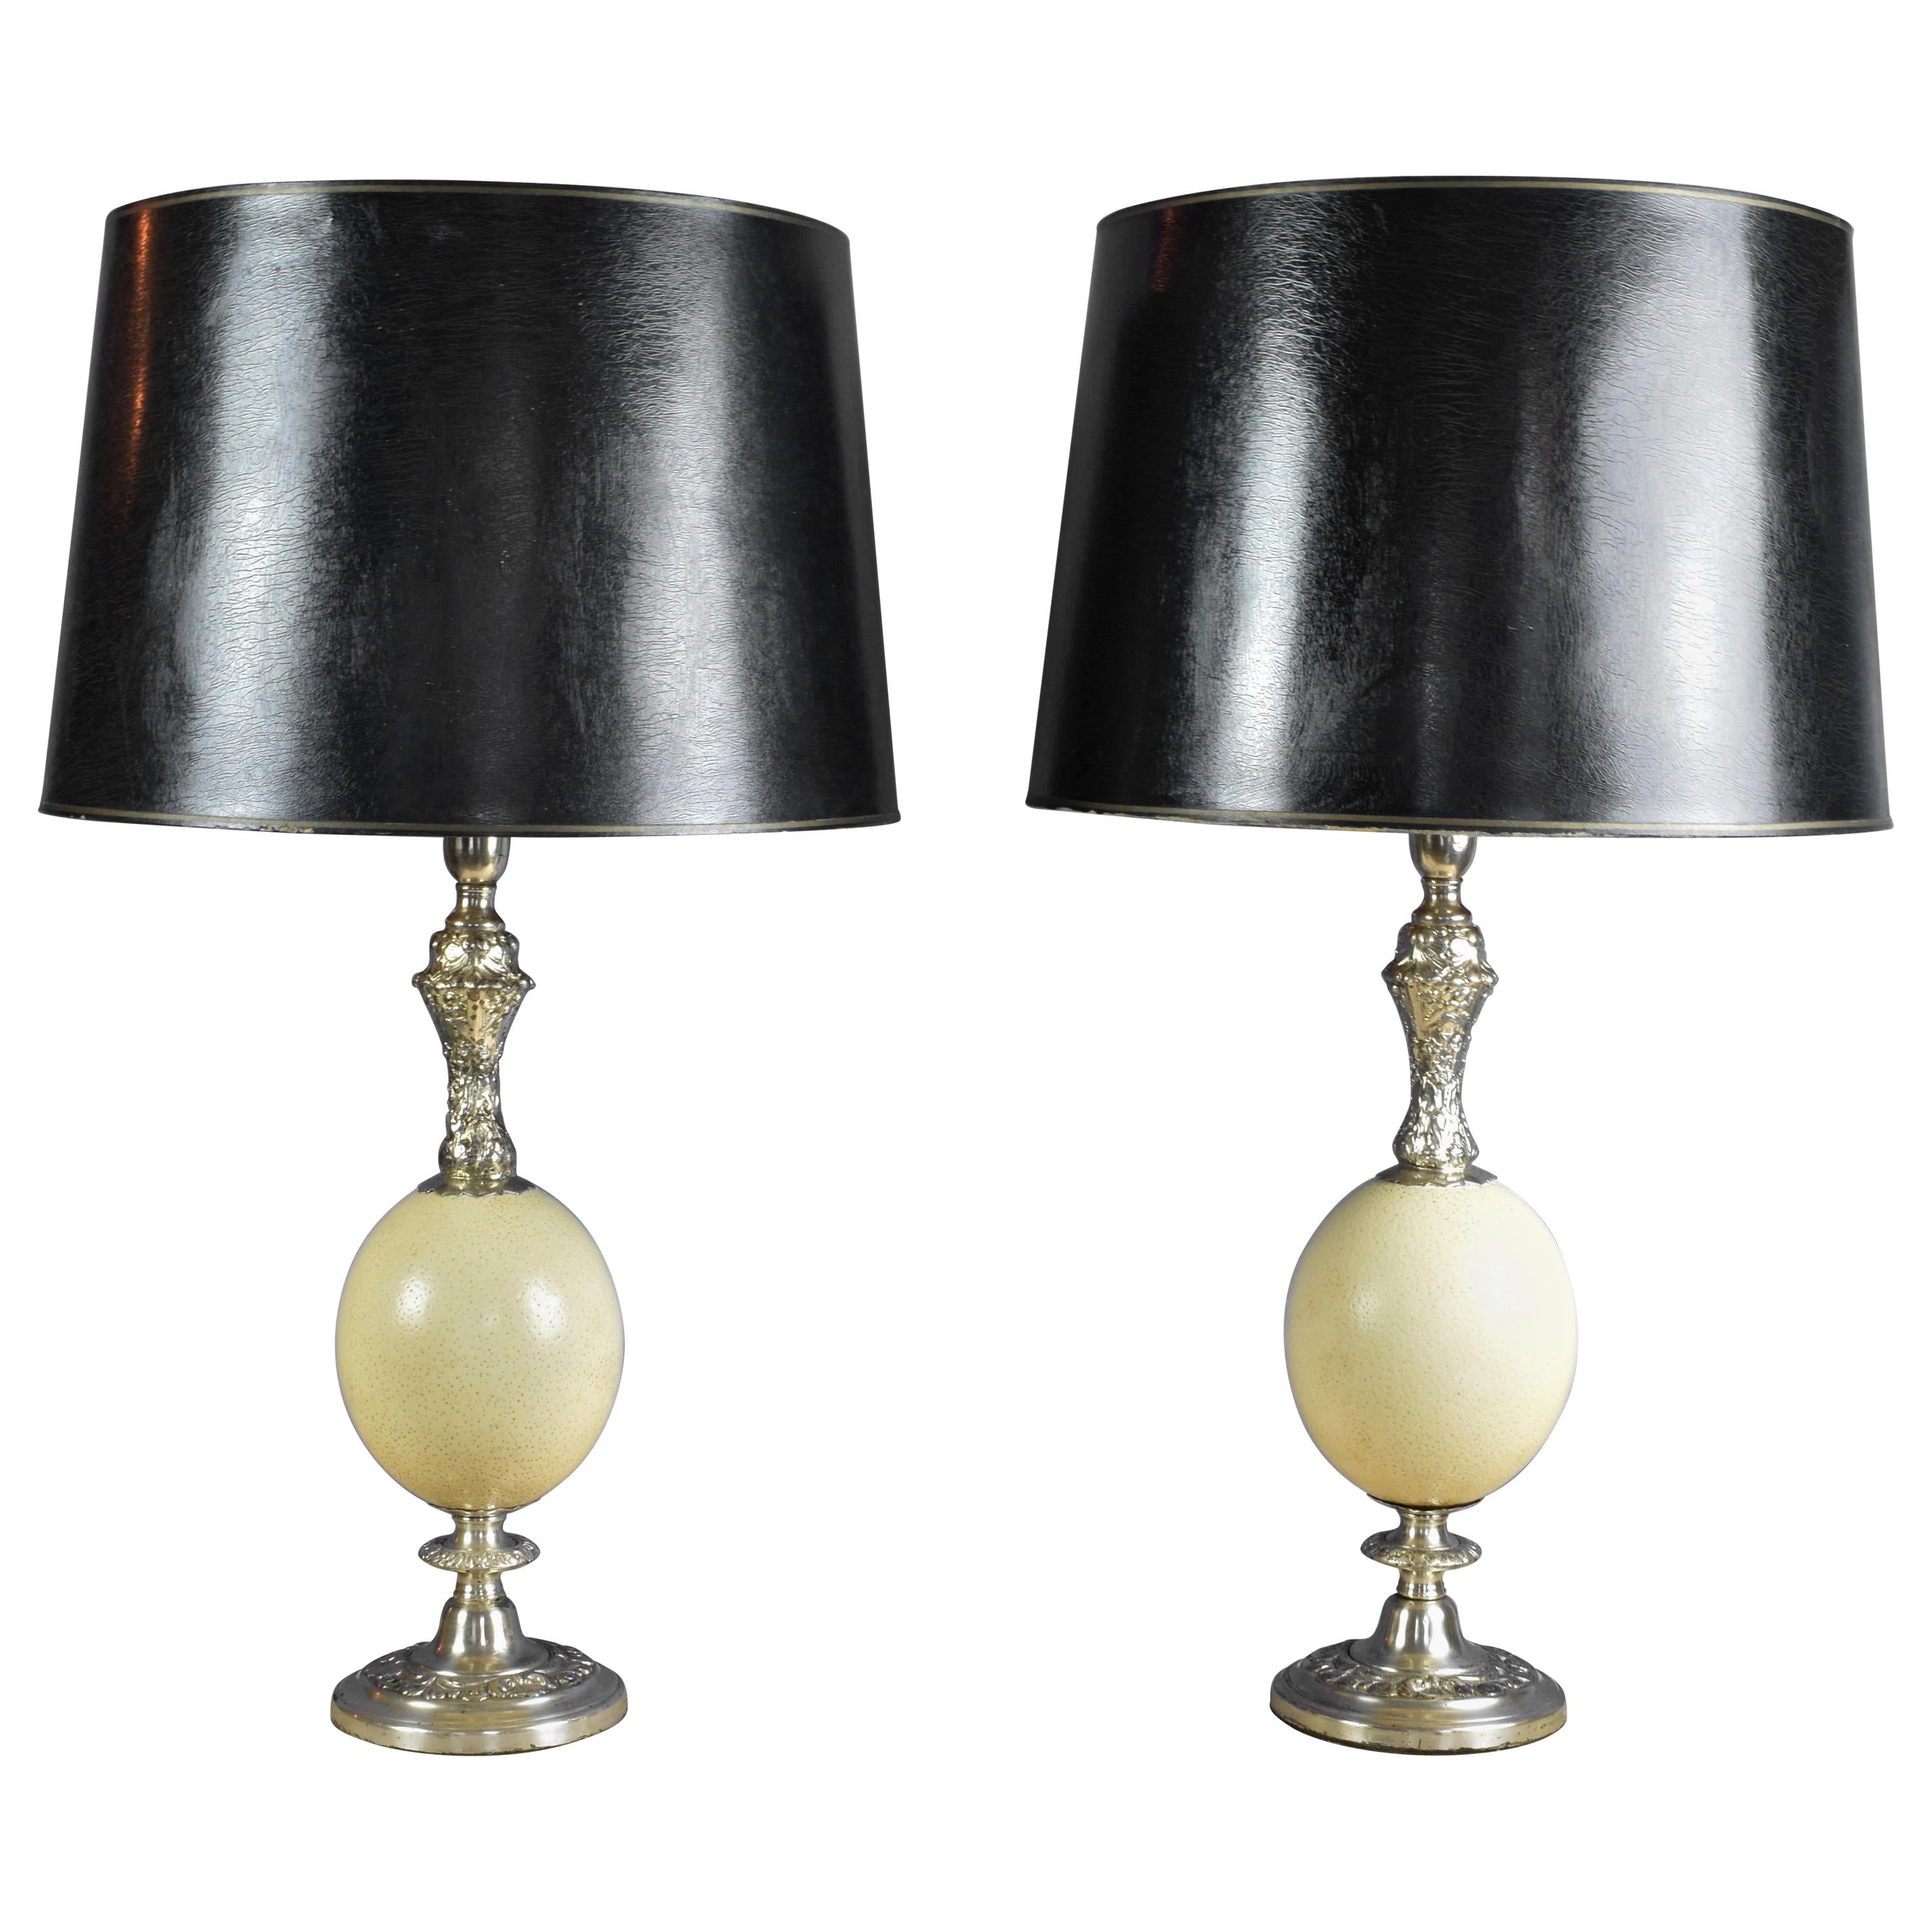 FINAL SALE Vintage French Silver Plate and Ostrich Egg Table Lamps For Sale